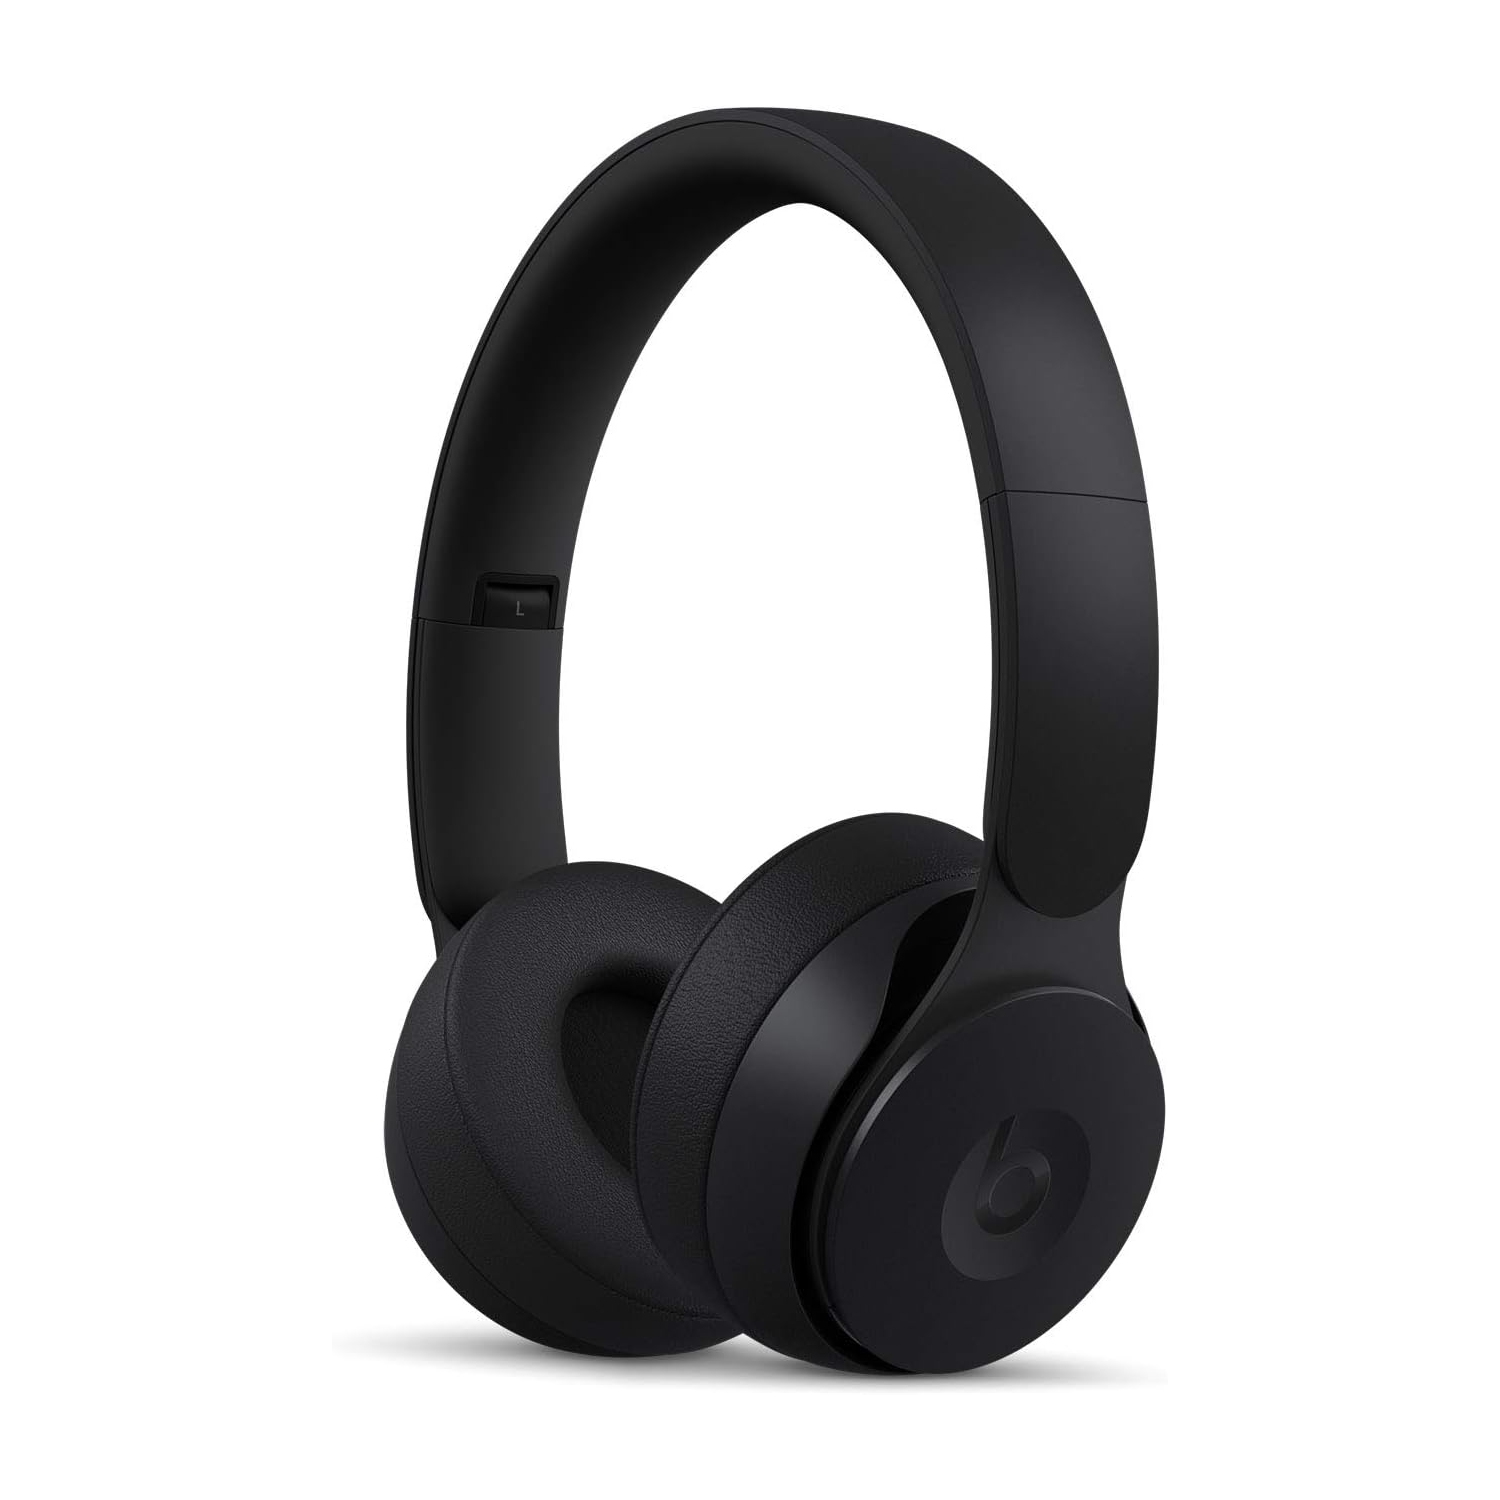 Refurbished (Excellent) - Beats Solo Pro Wireless Noise Cancelling On-Ear Headphones - Black